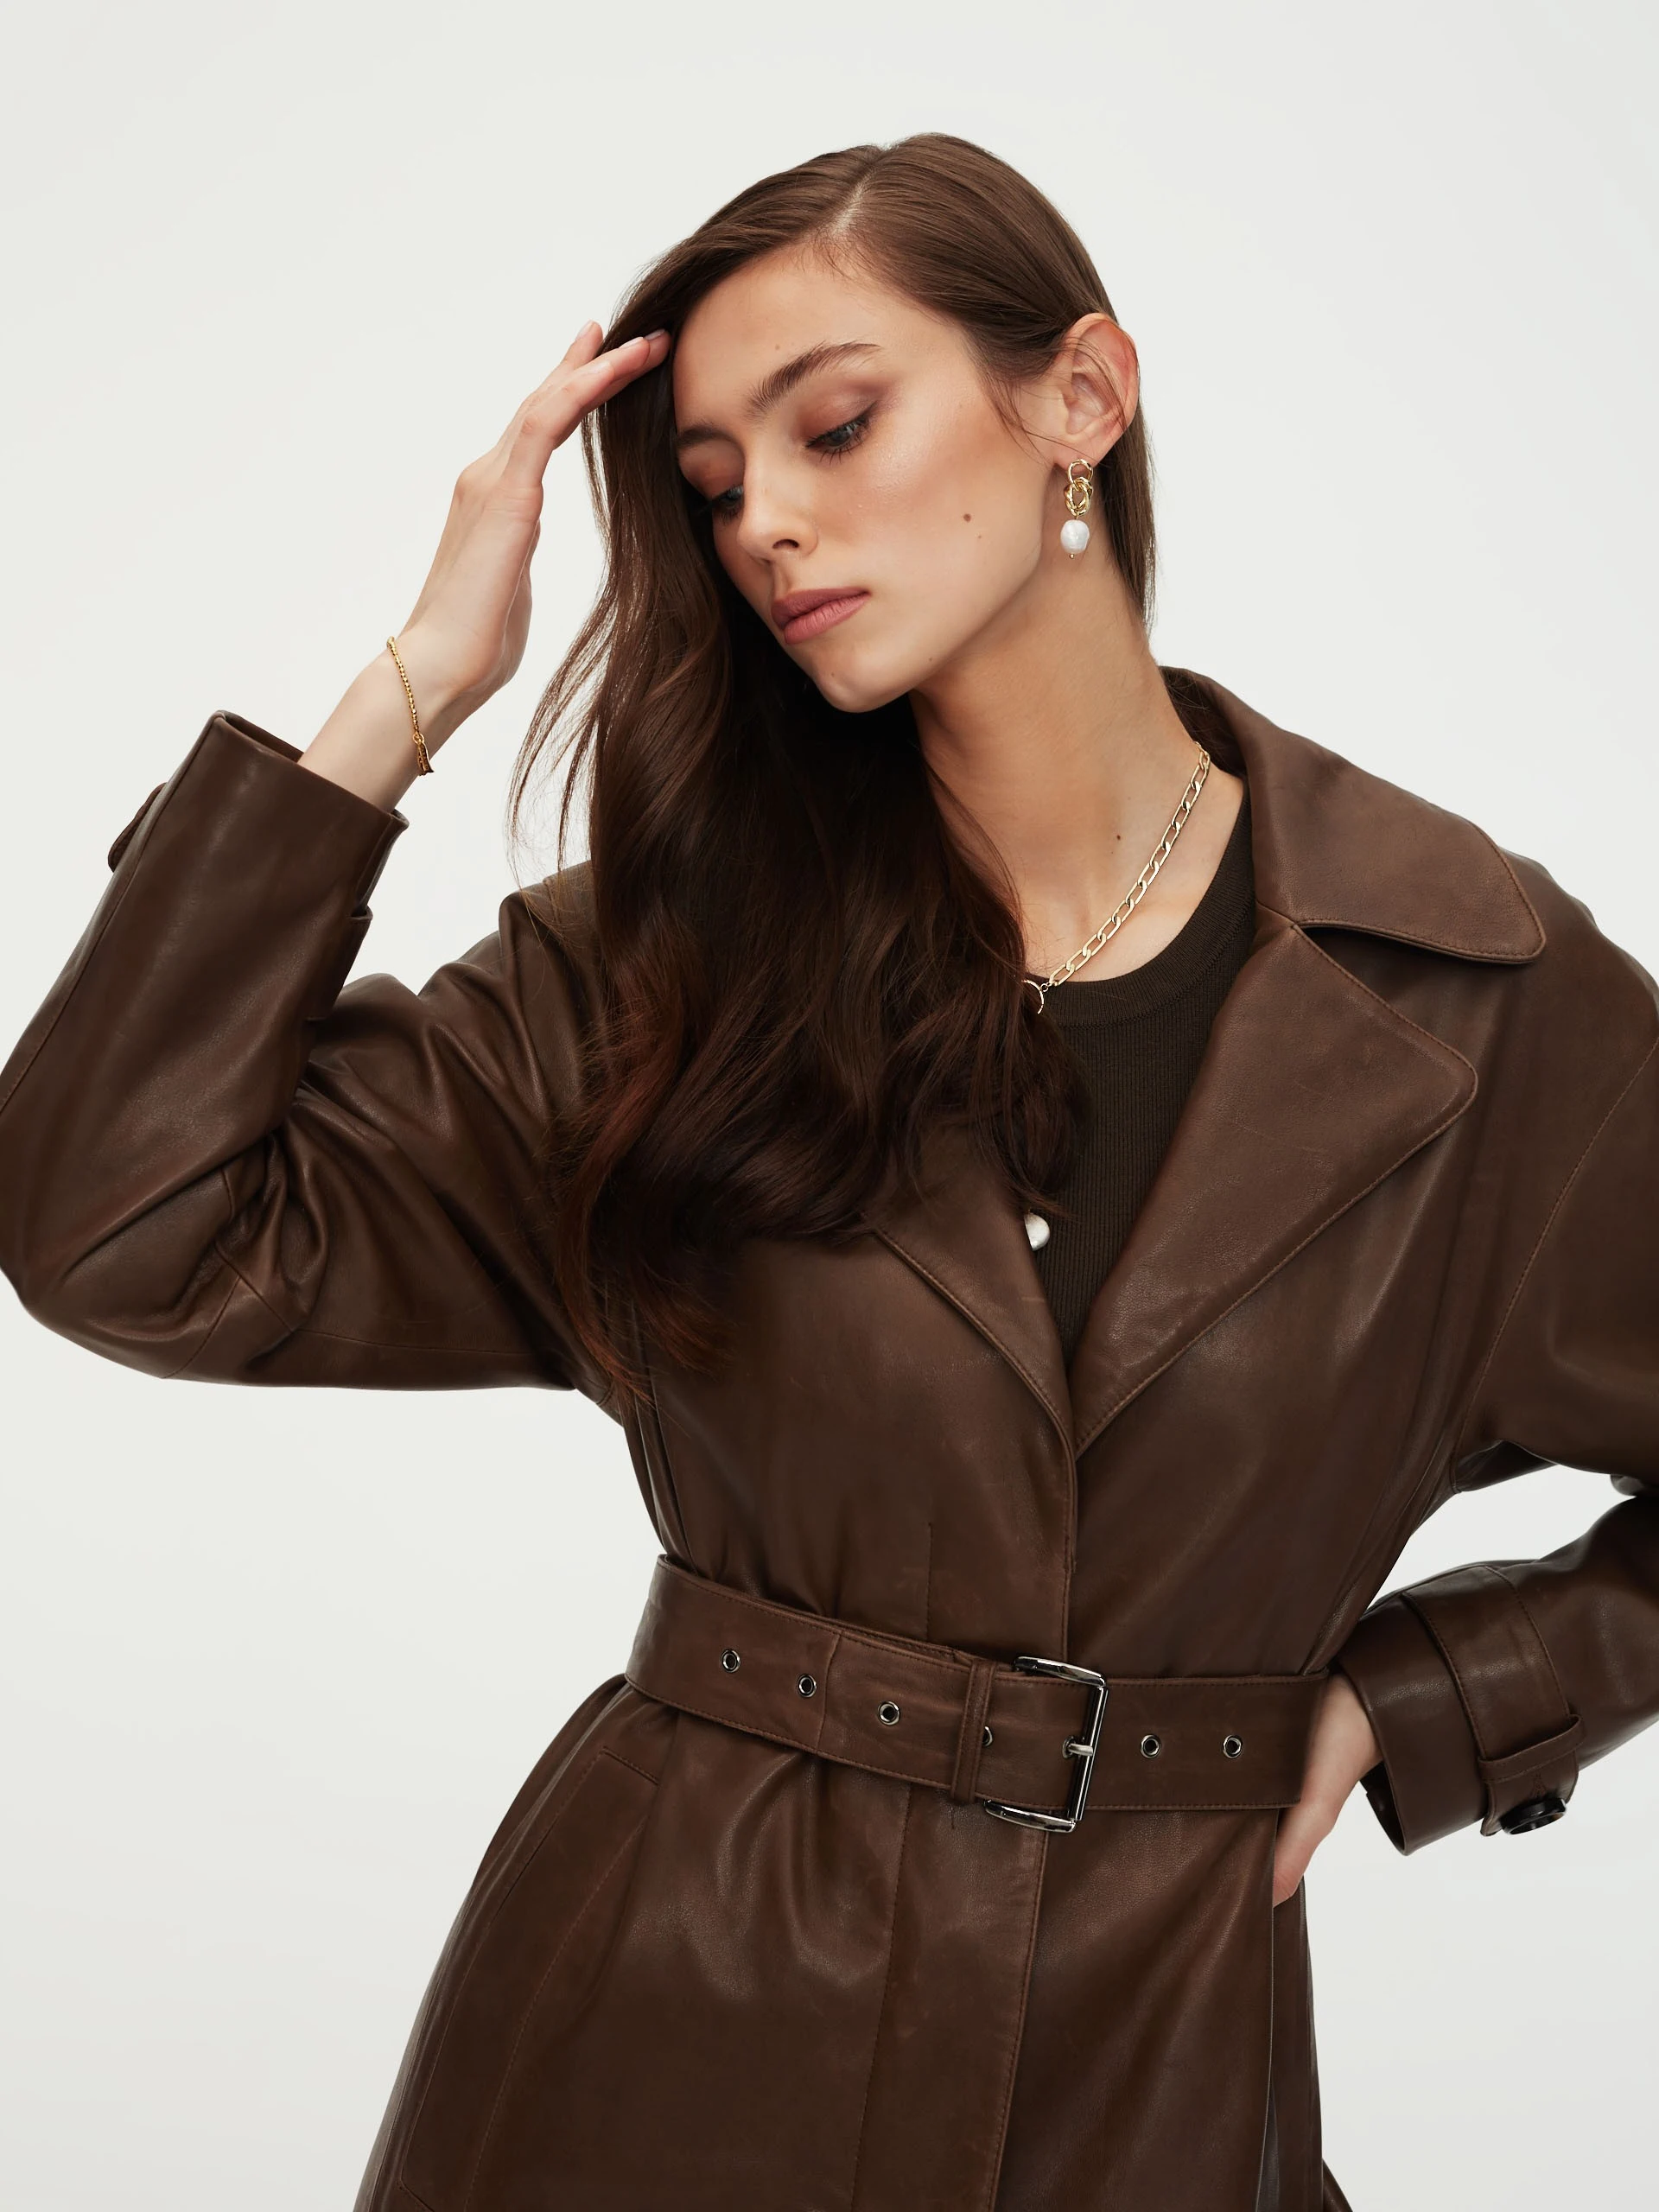 Leather coat in brown color